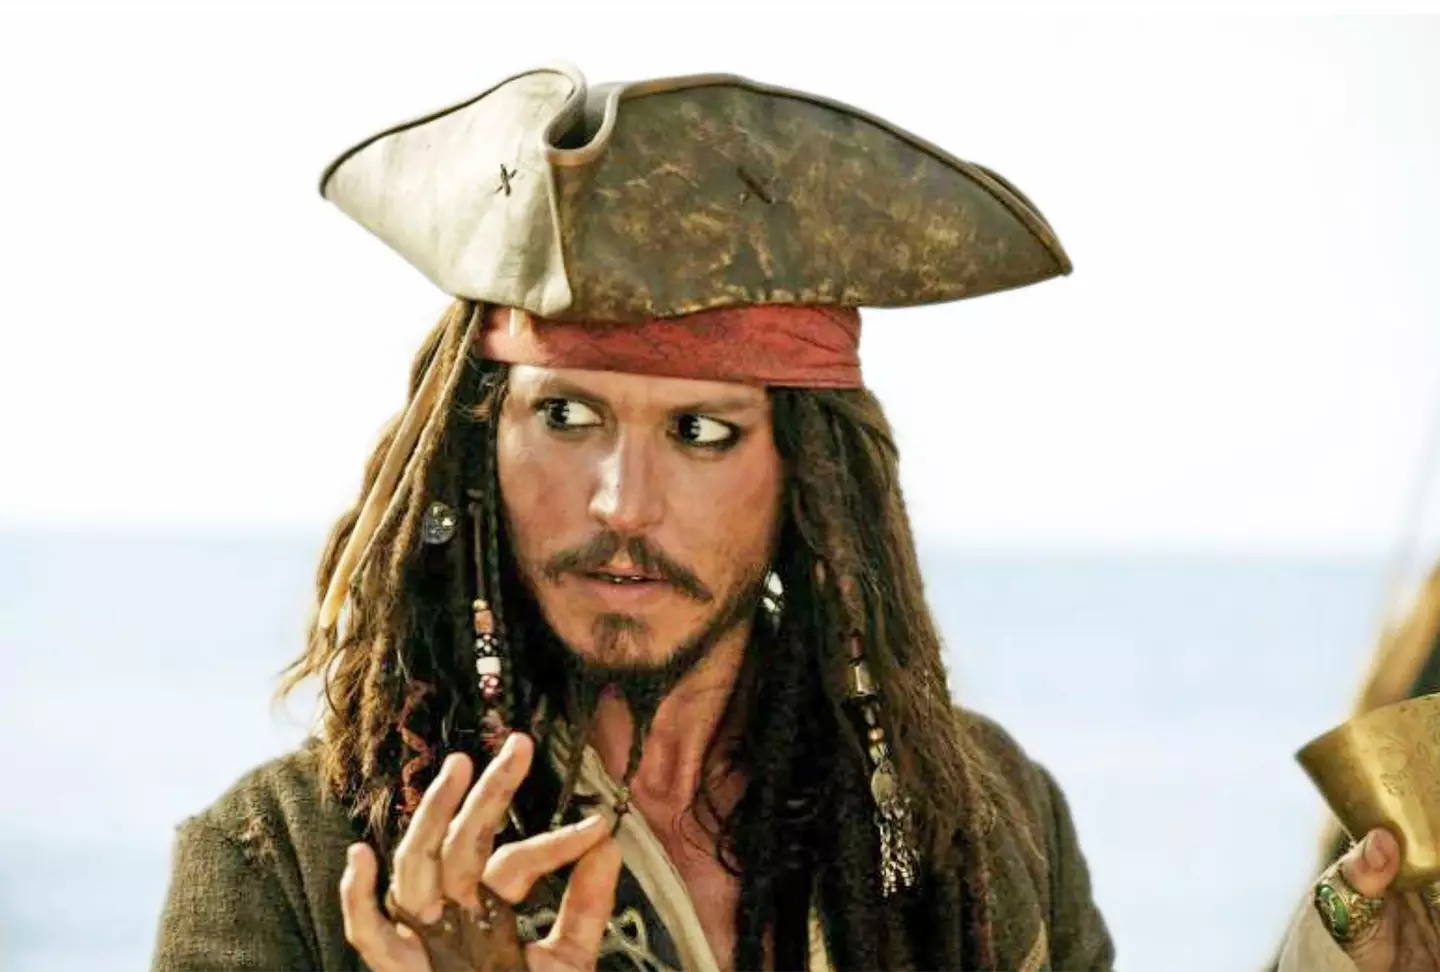 Depp has been part of the Pirates of the Caribbean movies since 2003.